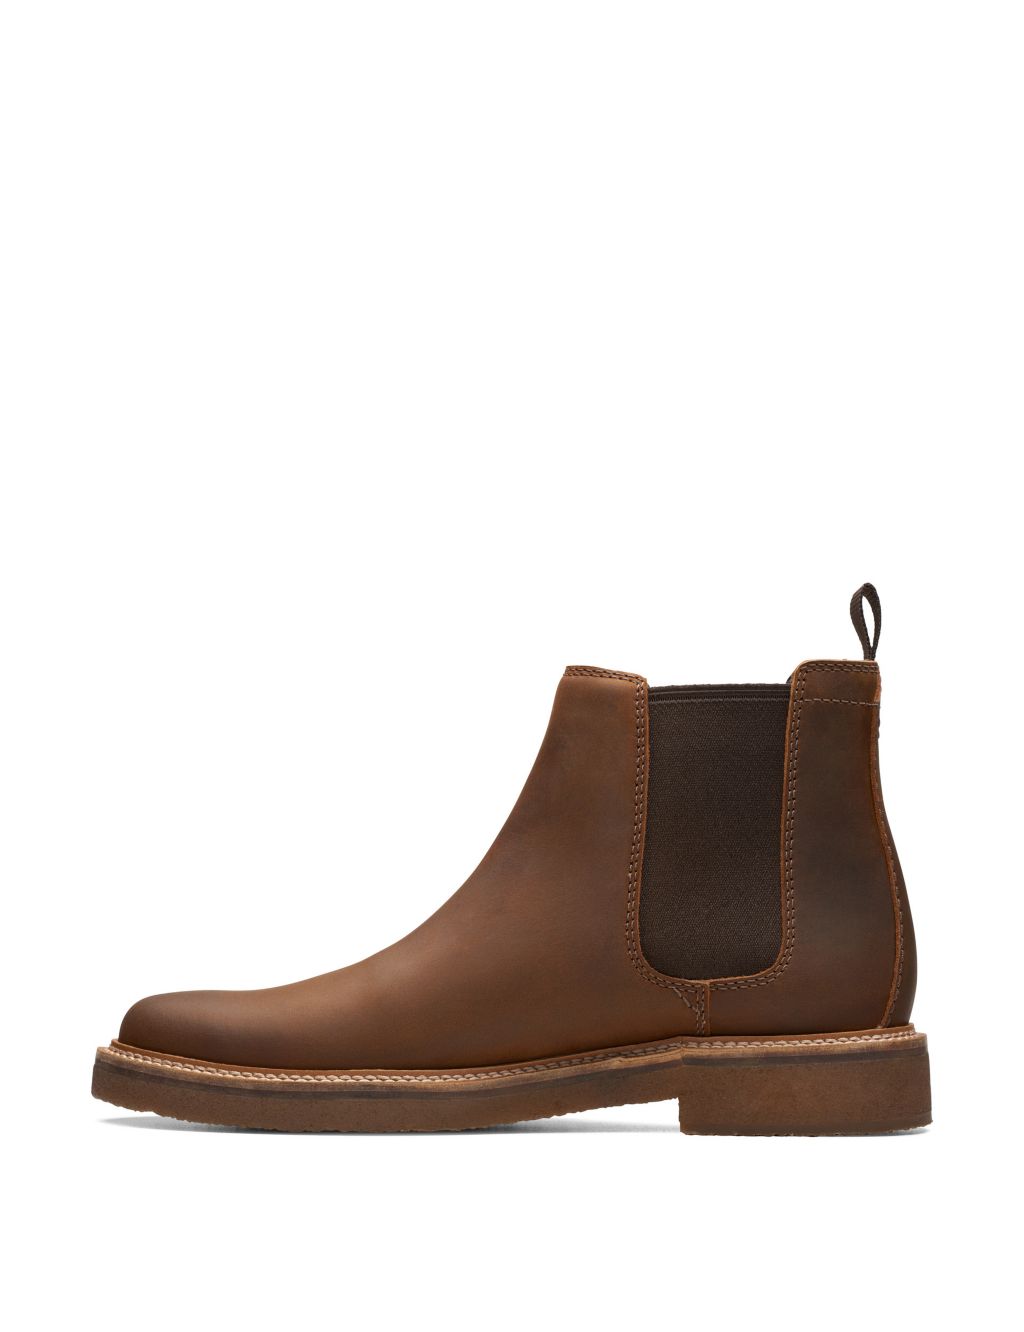 Leather Chelsea Boots image 6